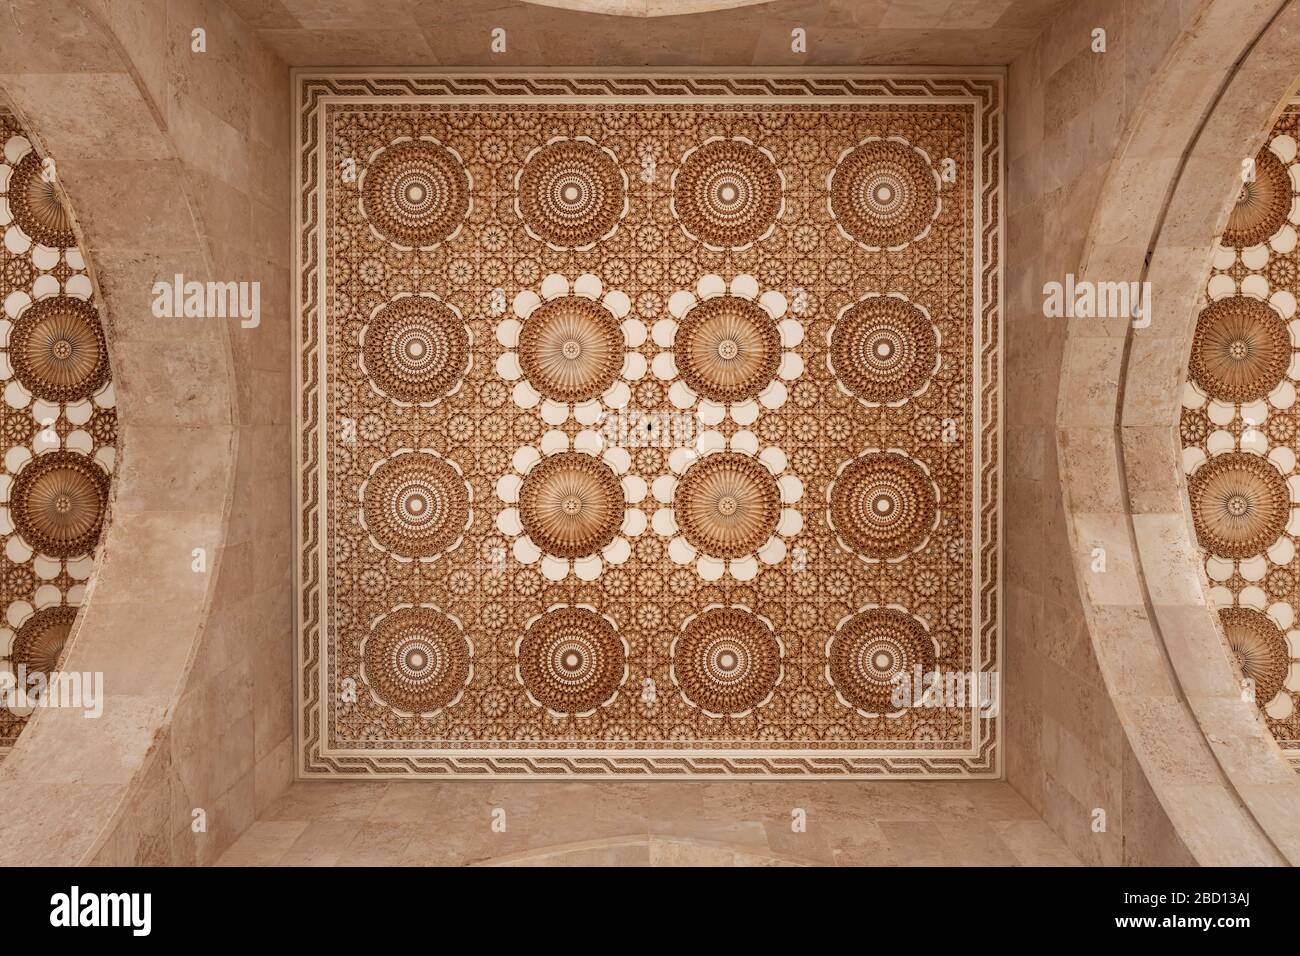 Beautiful ceiling with carved plaster decoration and marble walls. Architectural detail from the mosque Hassan II in Casablanca, Morocco. Stock Photo